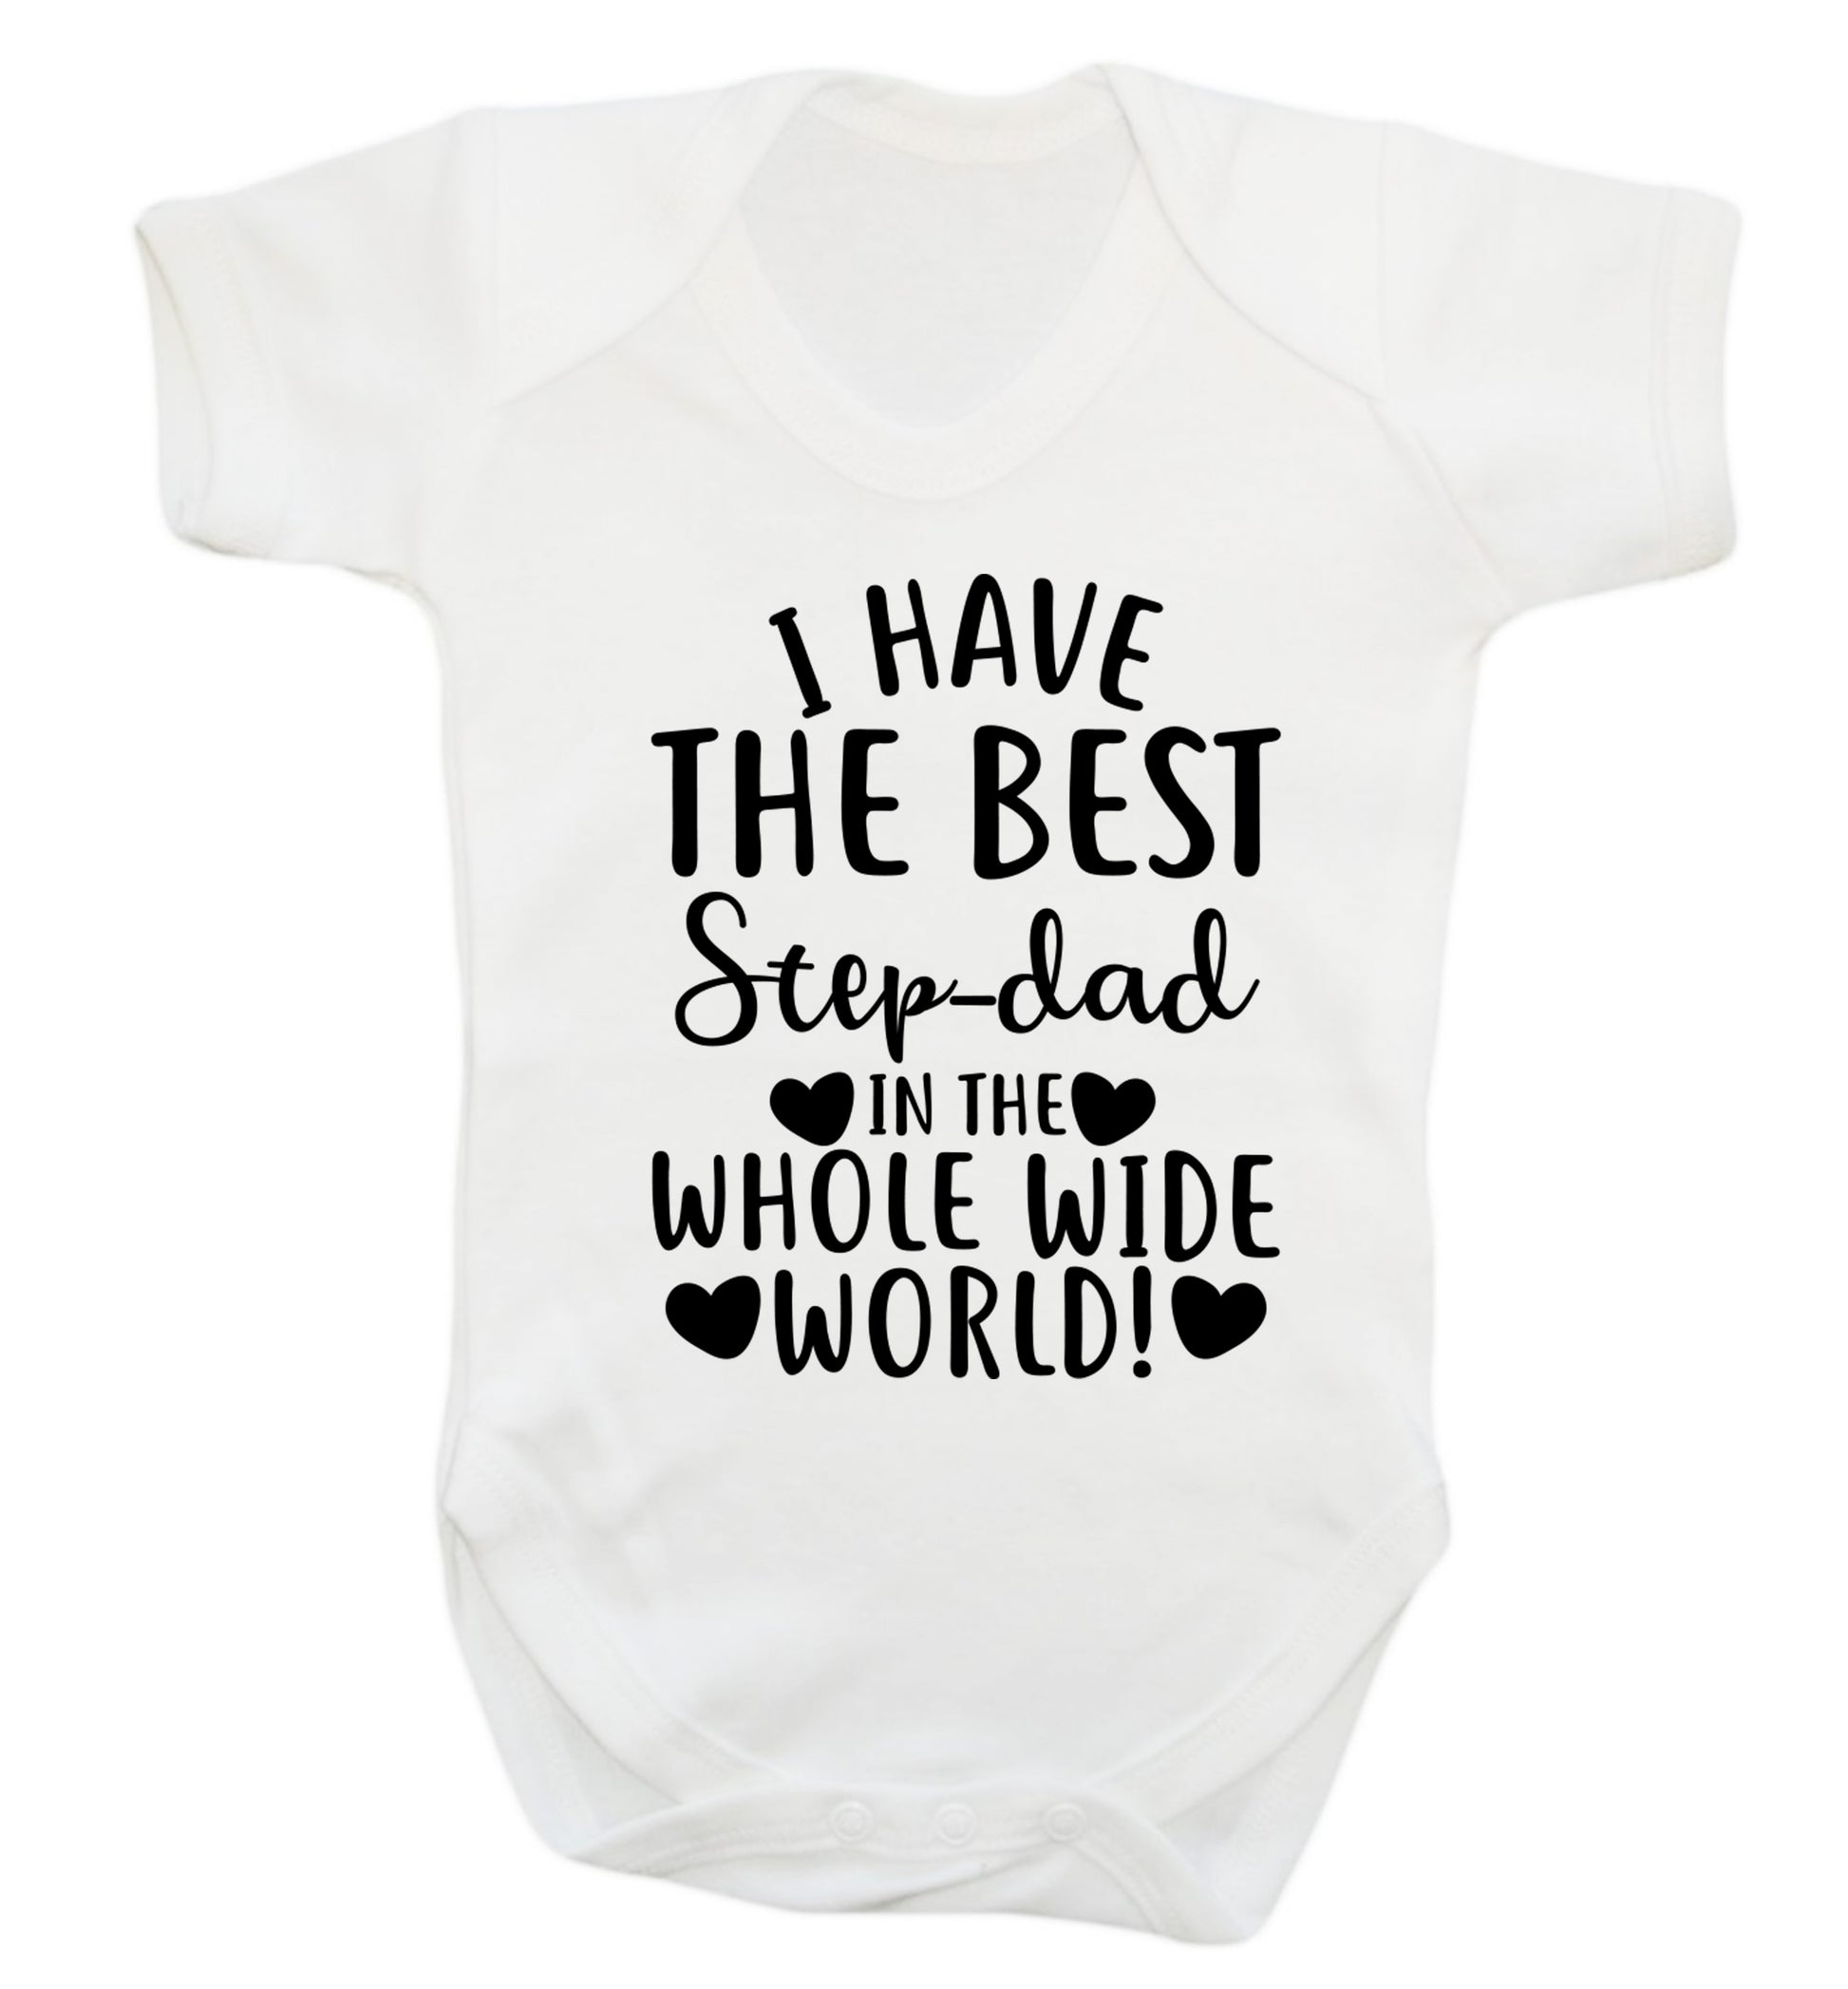 I have the best step-dad in the whole wide world! Baby Vest white 18-24 months